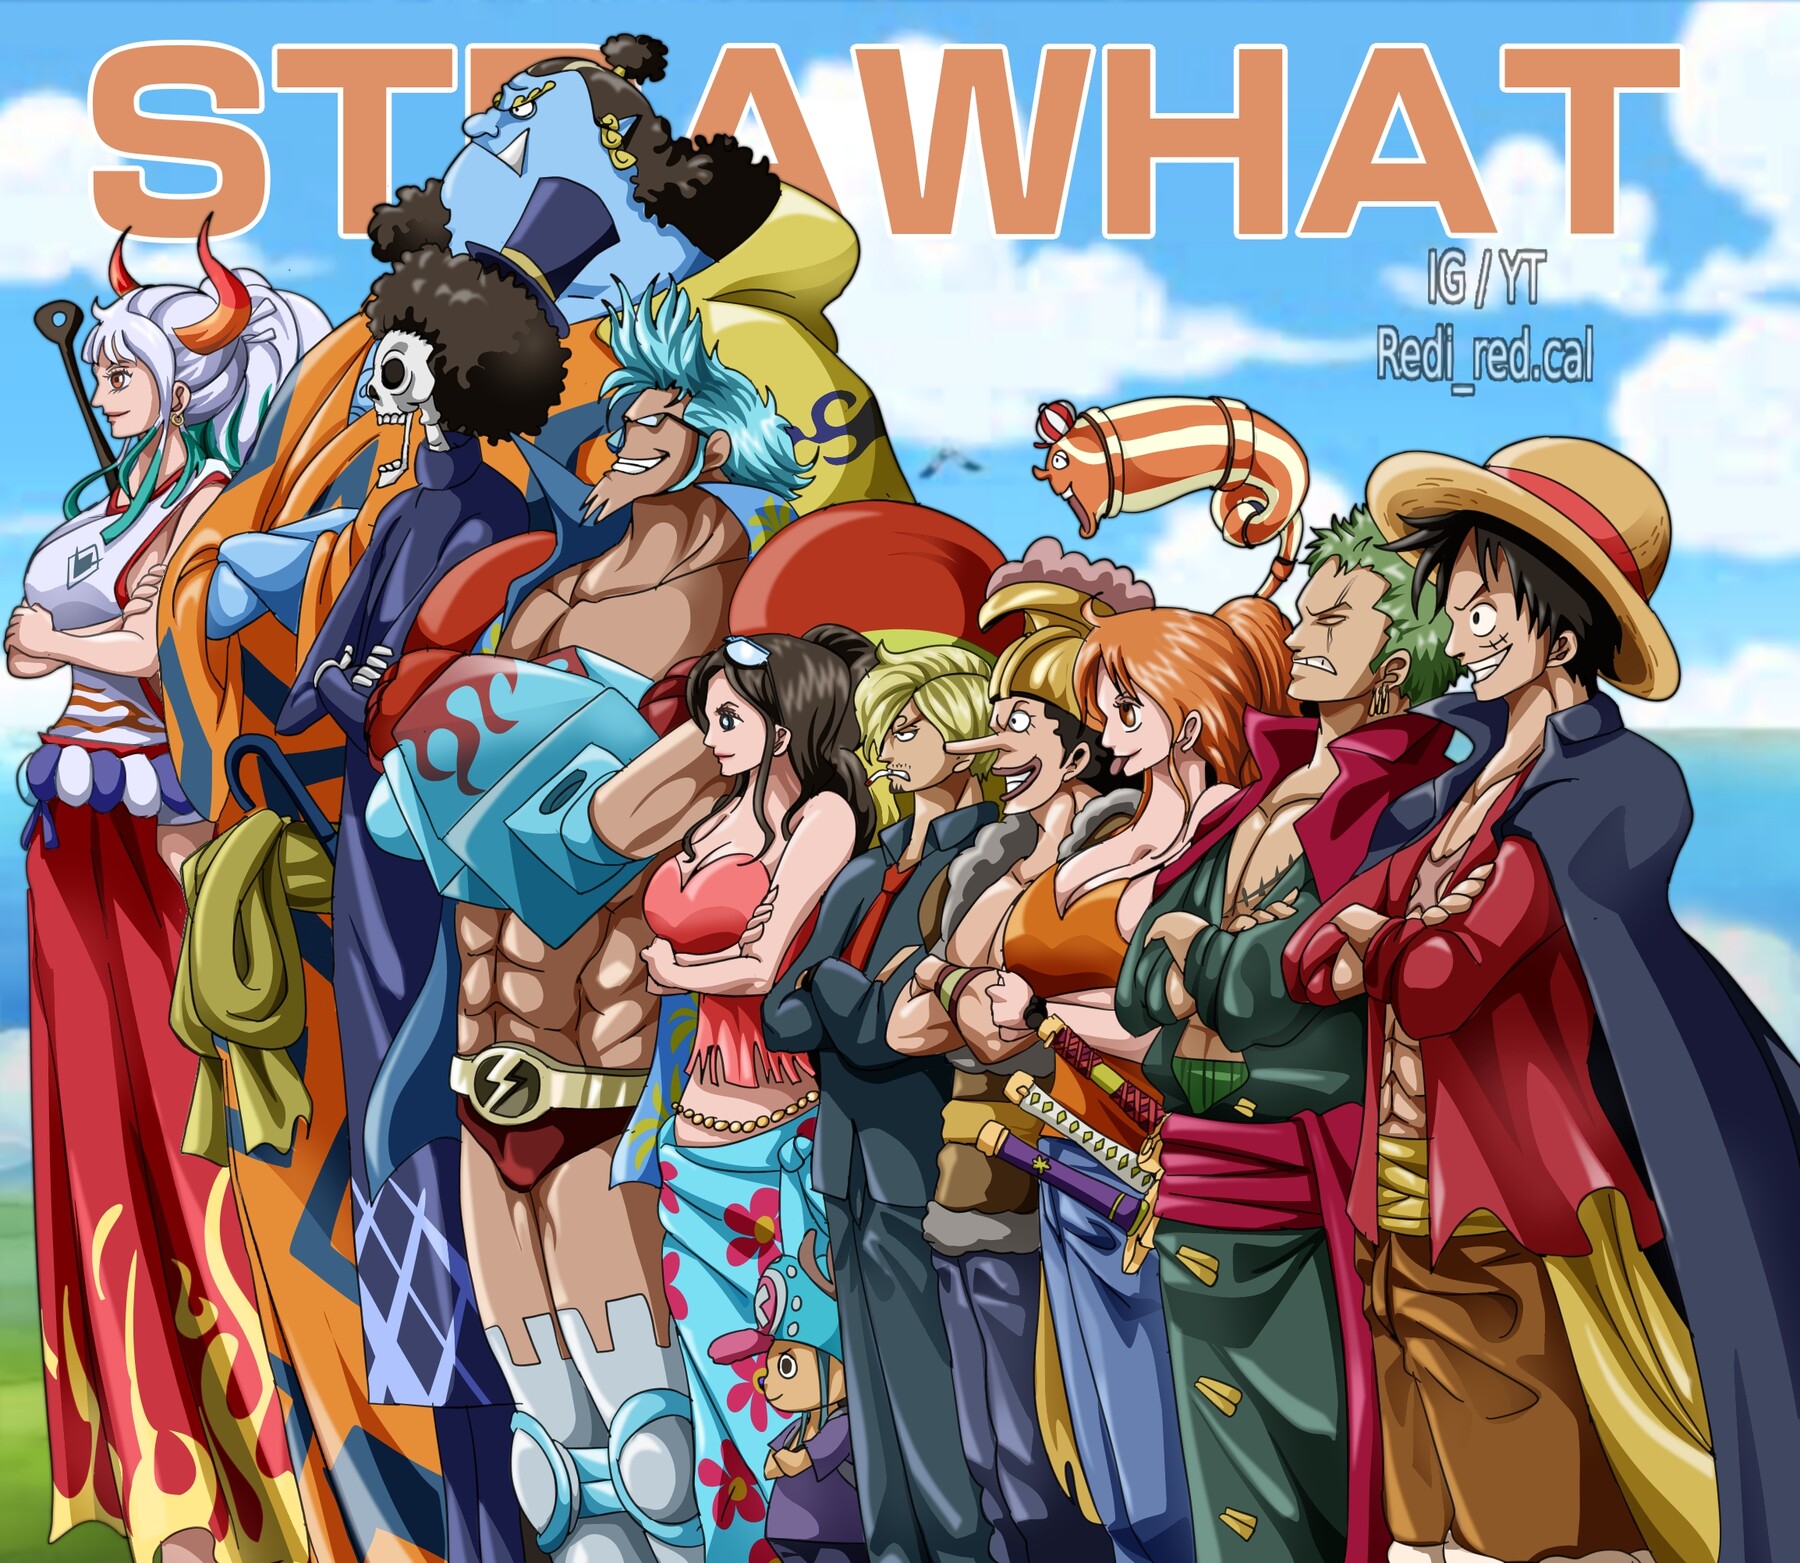 One piece poster